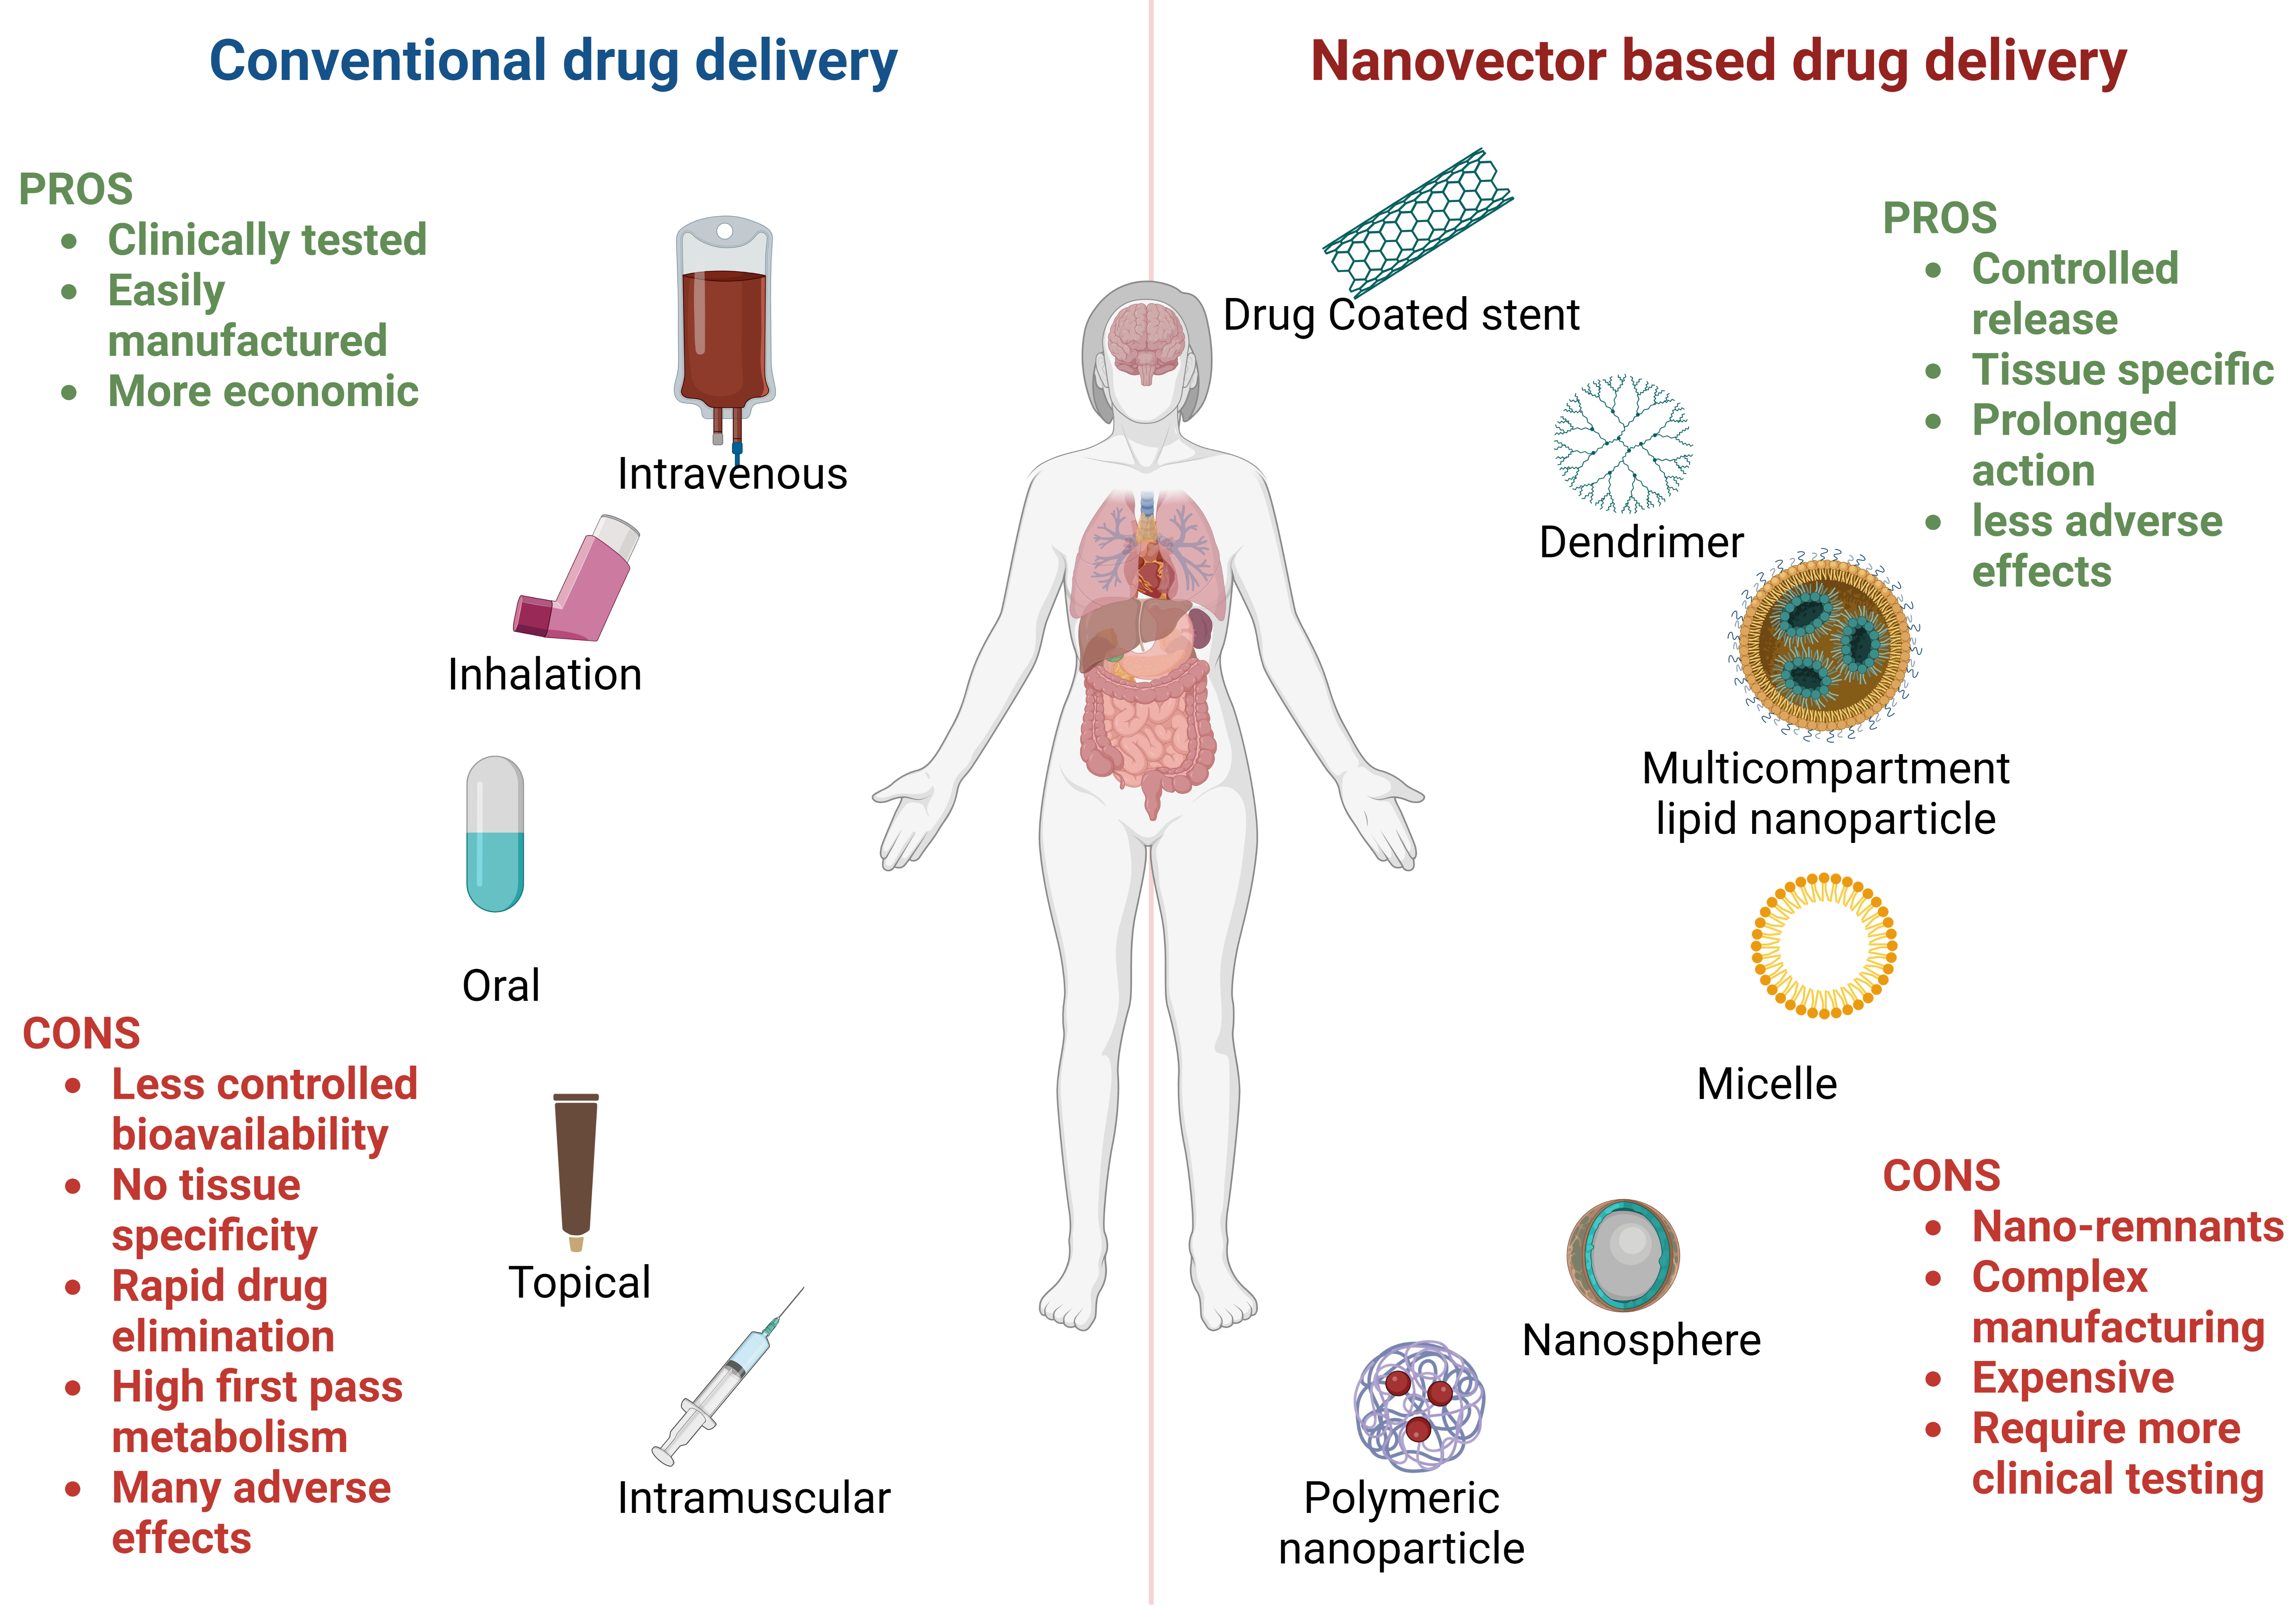 Conventional vs. Nanovector Drug Delivery PORS and CONS